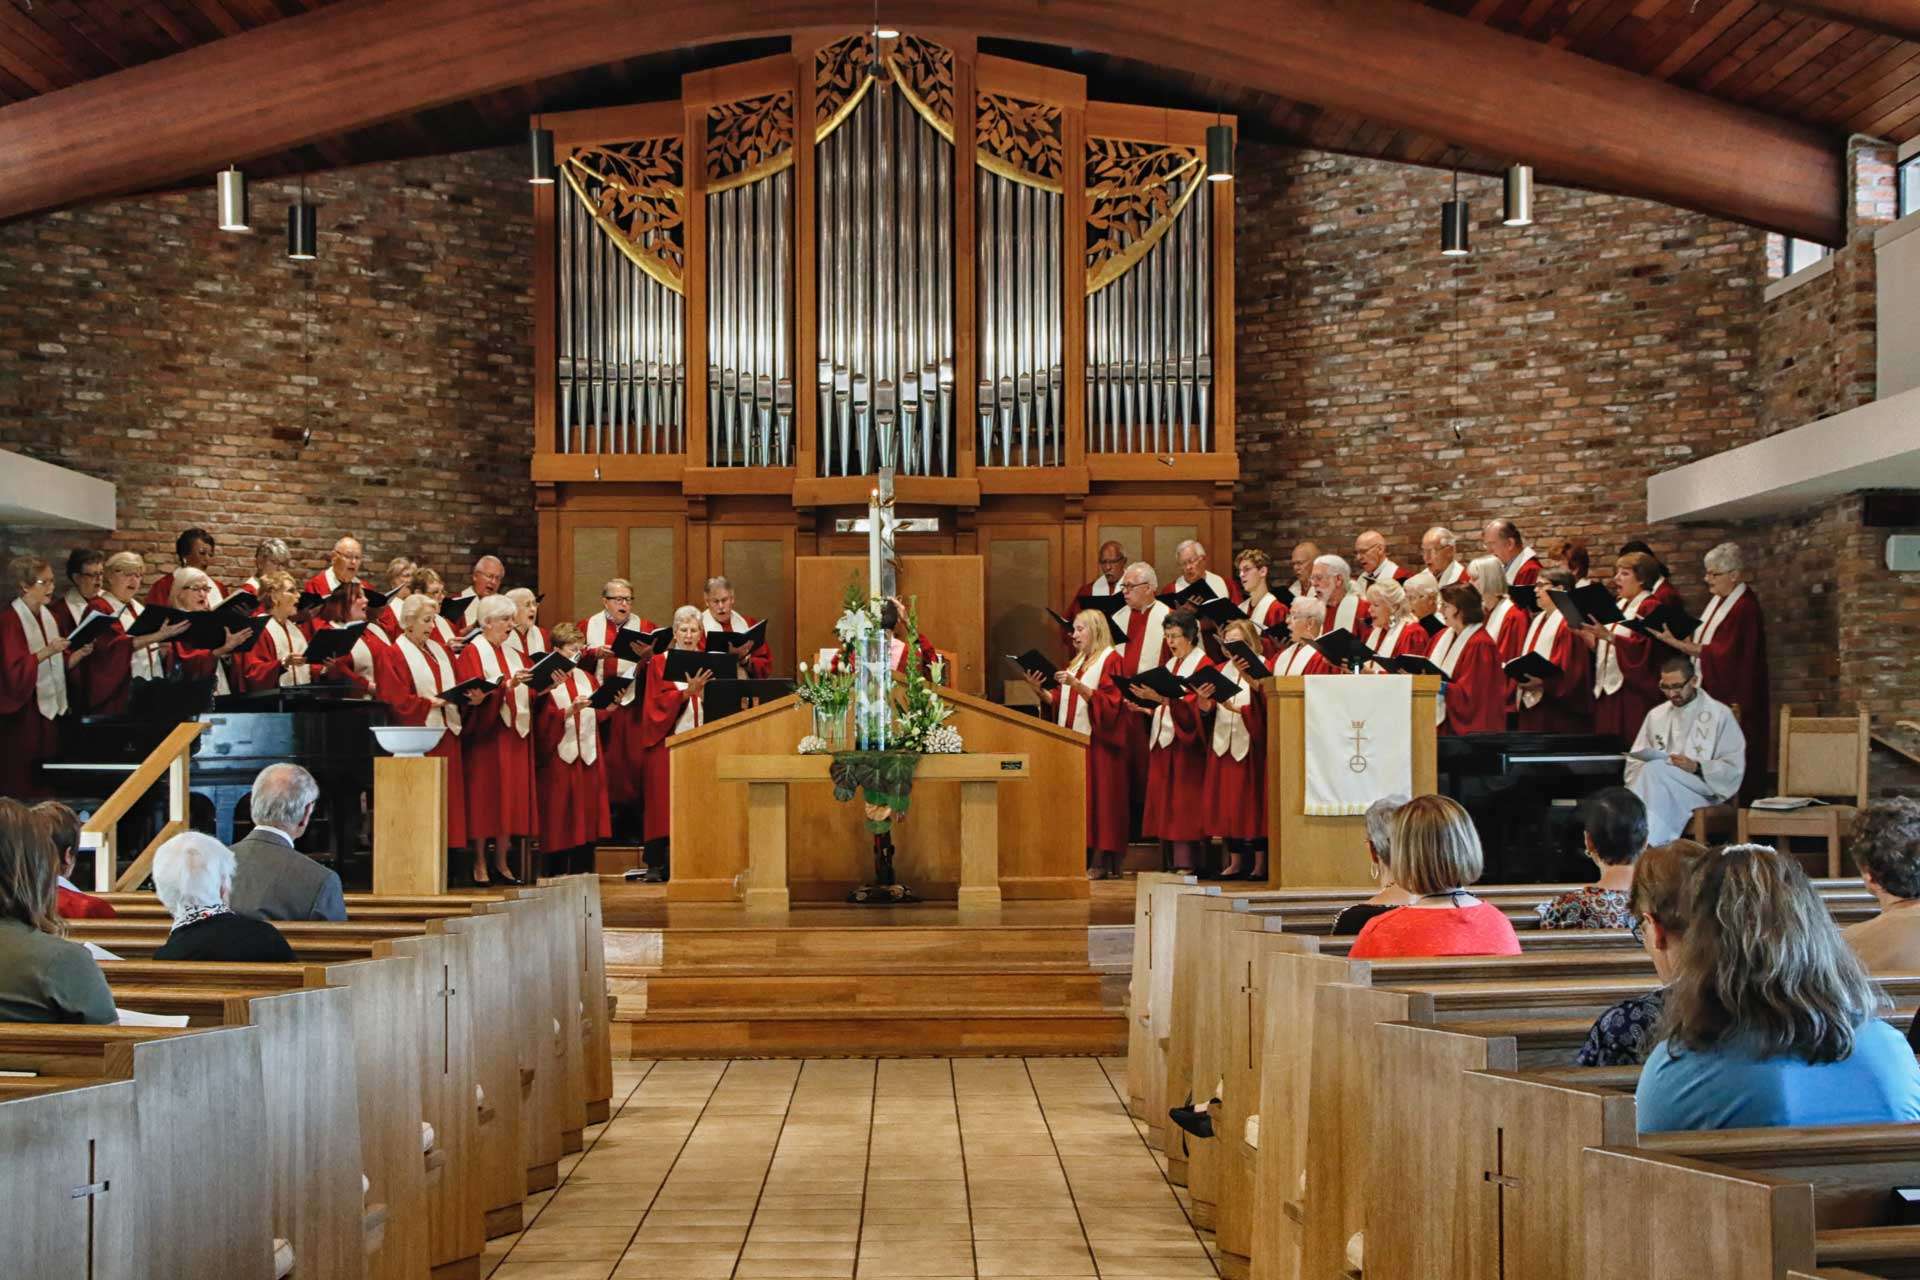 Worship service showing the choir, Pastor Wes Bixby, and the congregation from behind